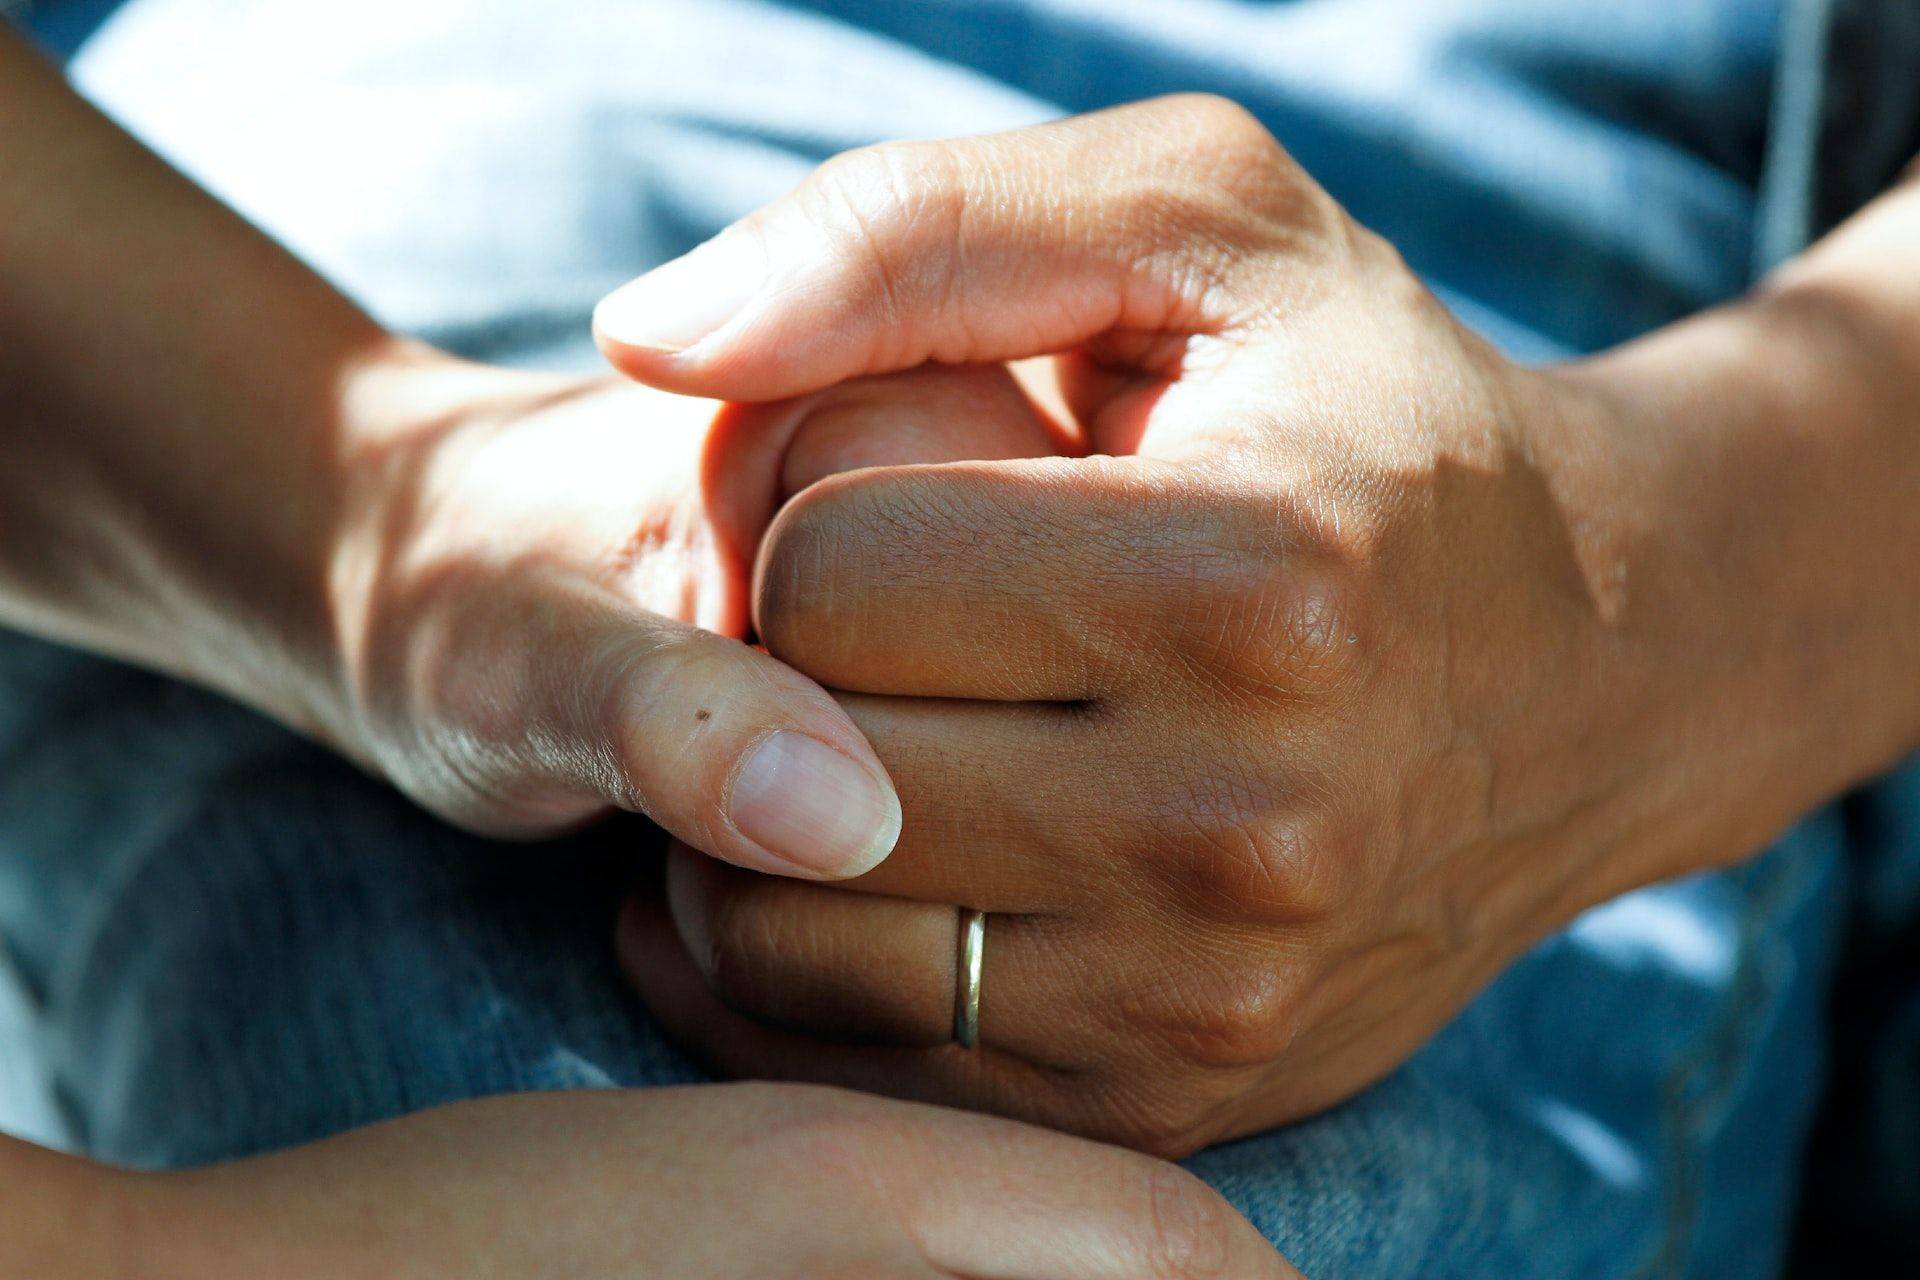 carer clasping hands with cancer patient